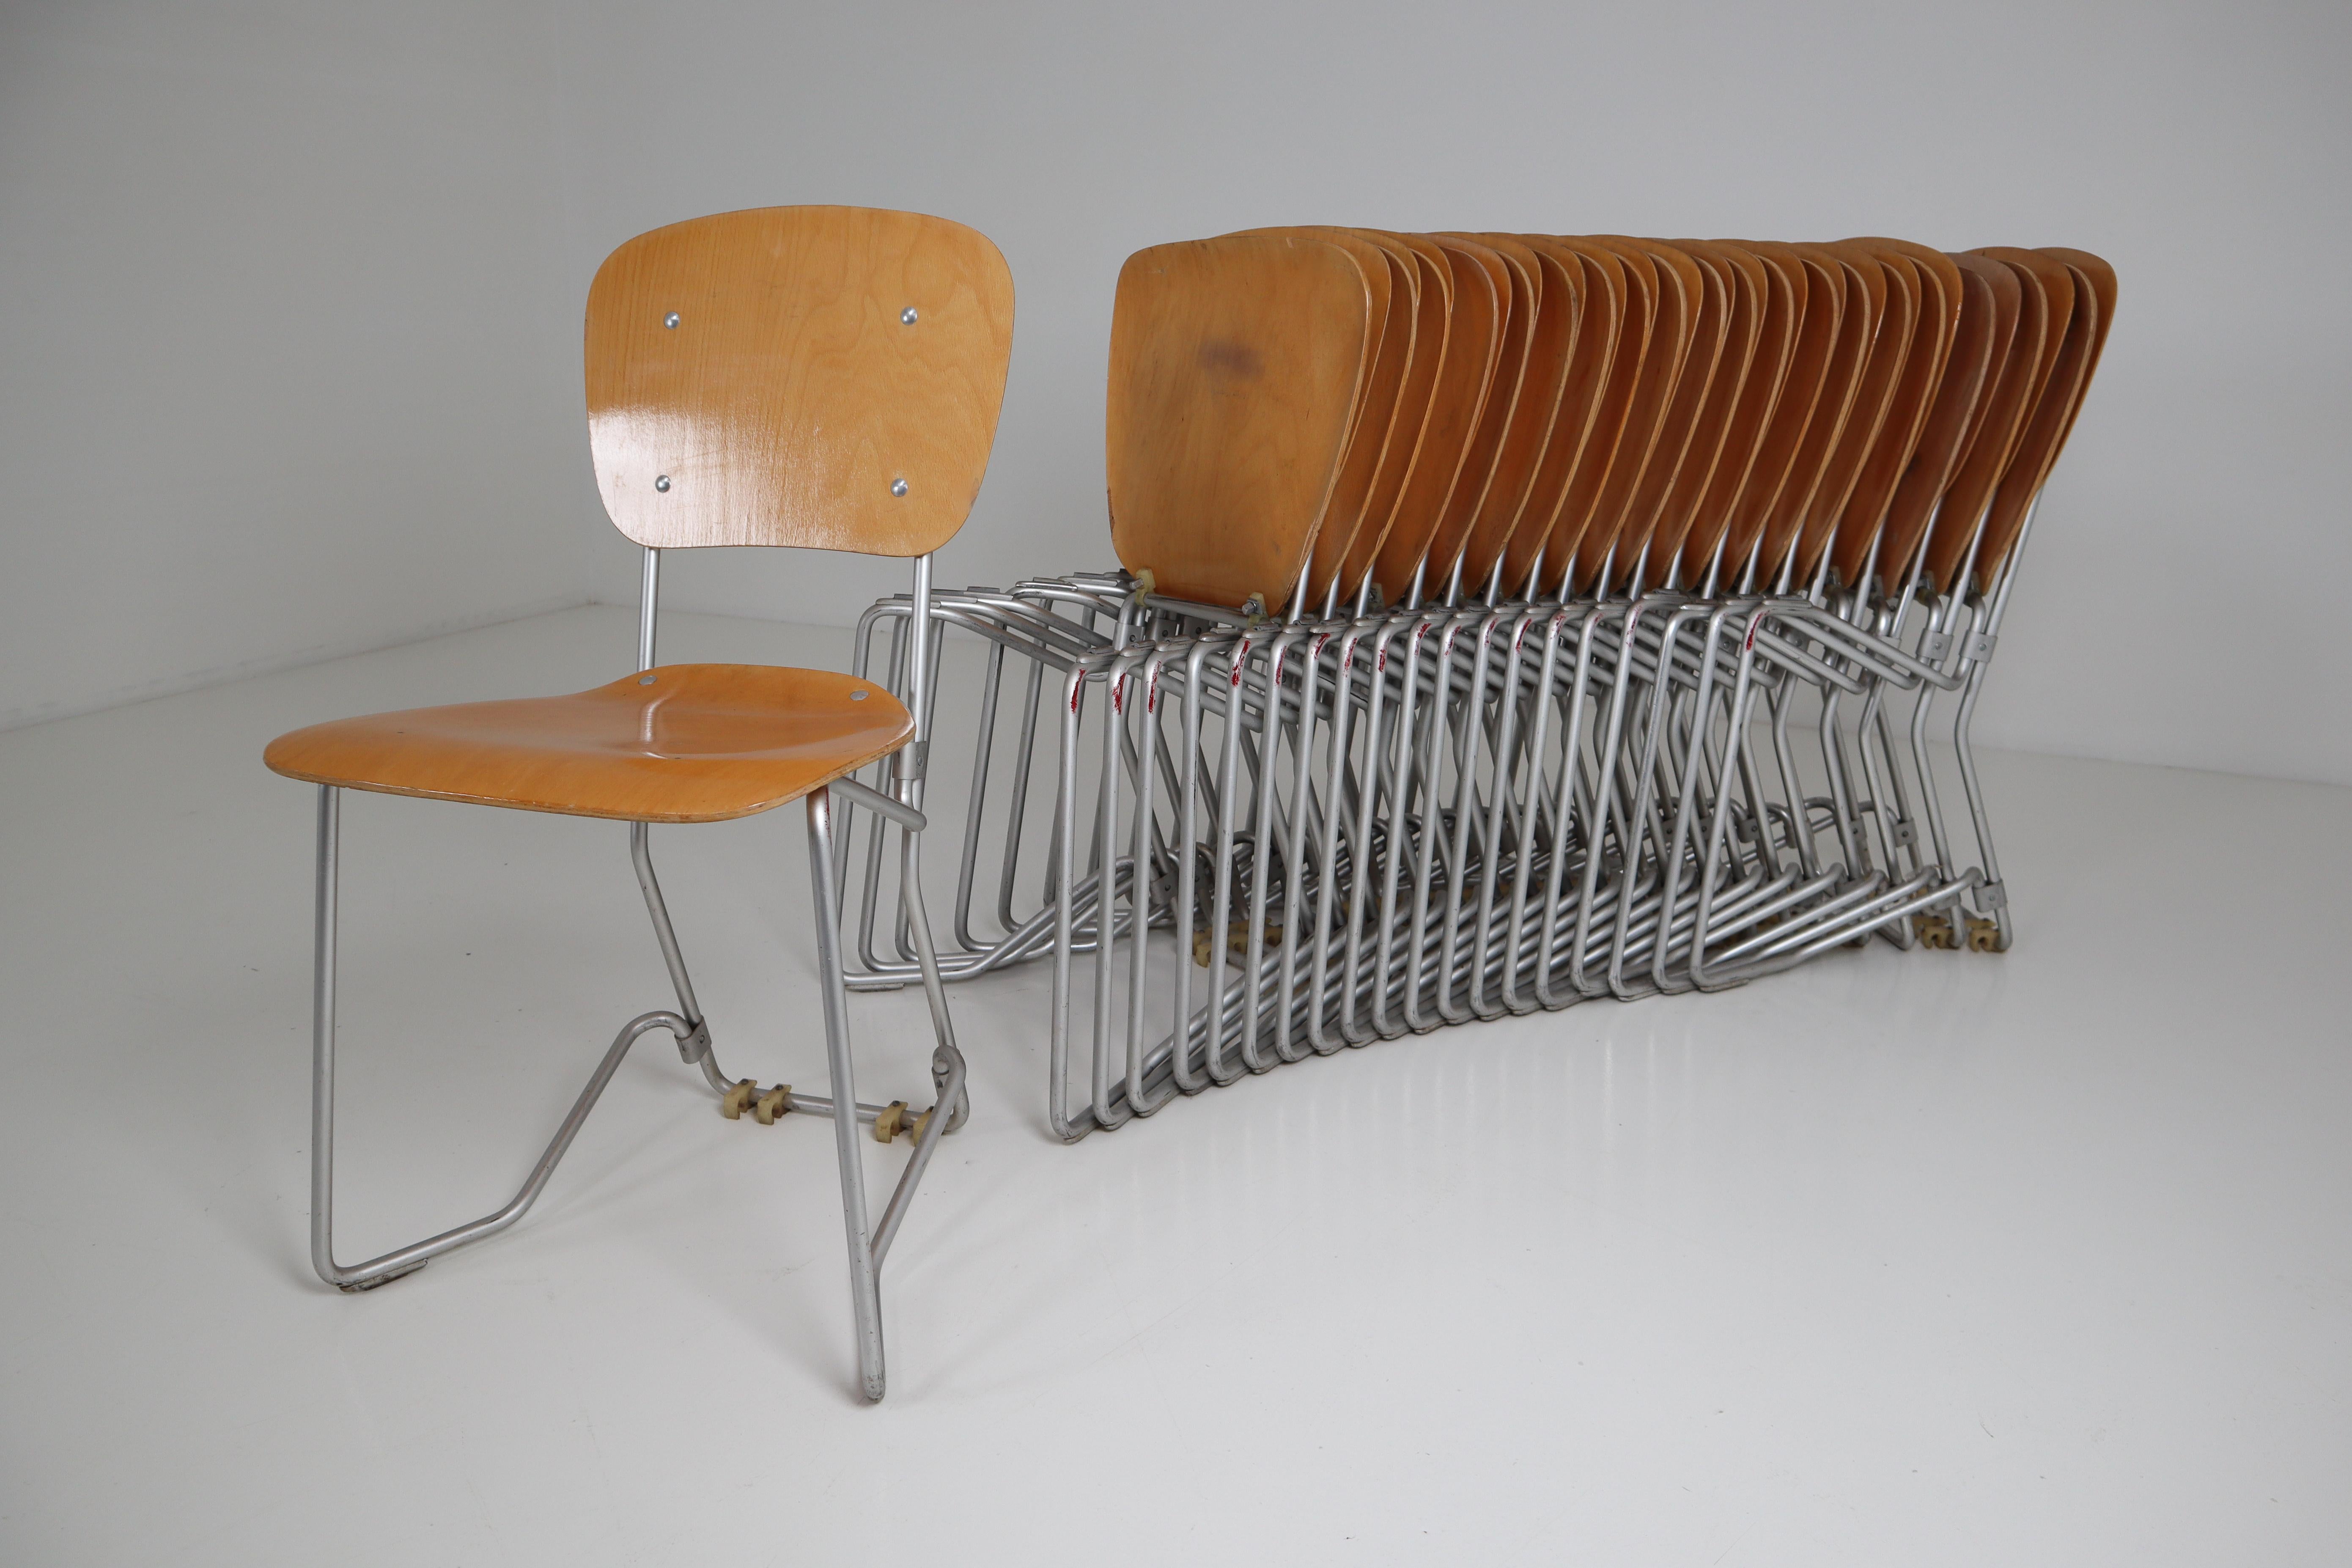 20 Chairs Designed by Armin Wirth for Hans Zollinger Sohre, Switzerland 1